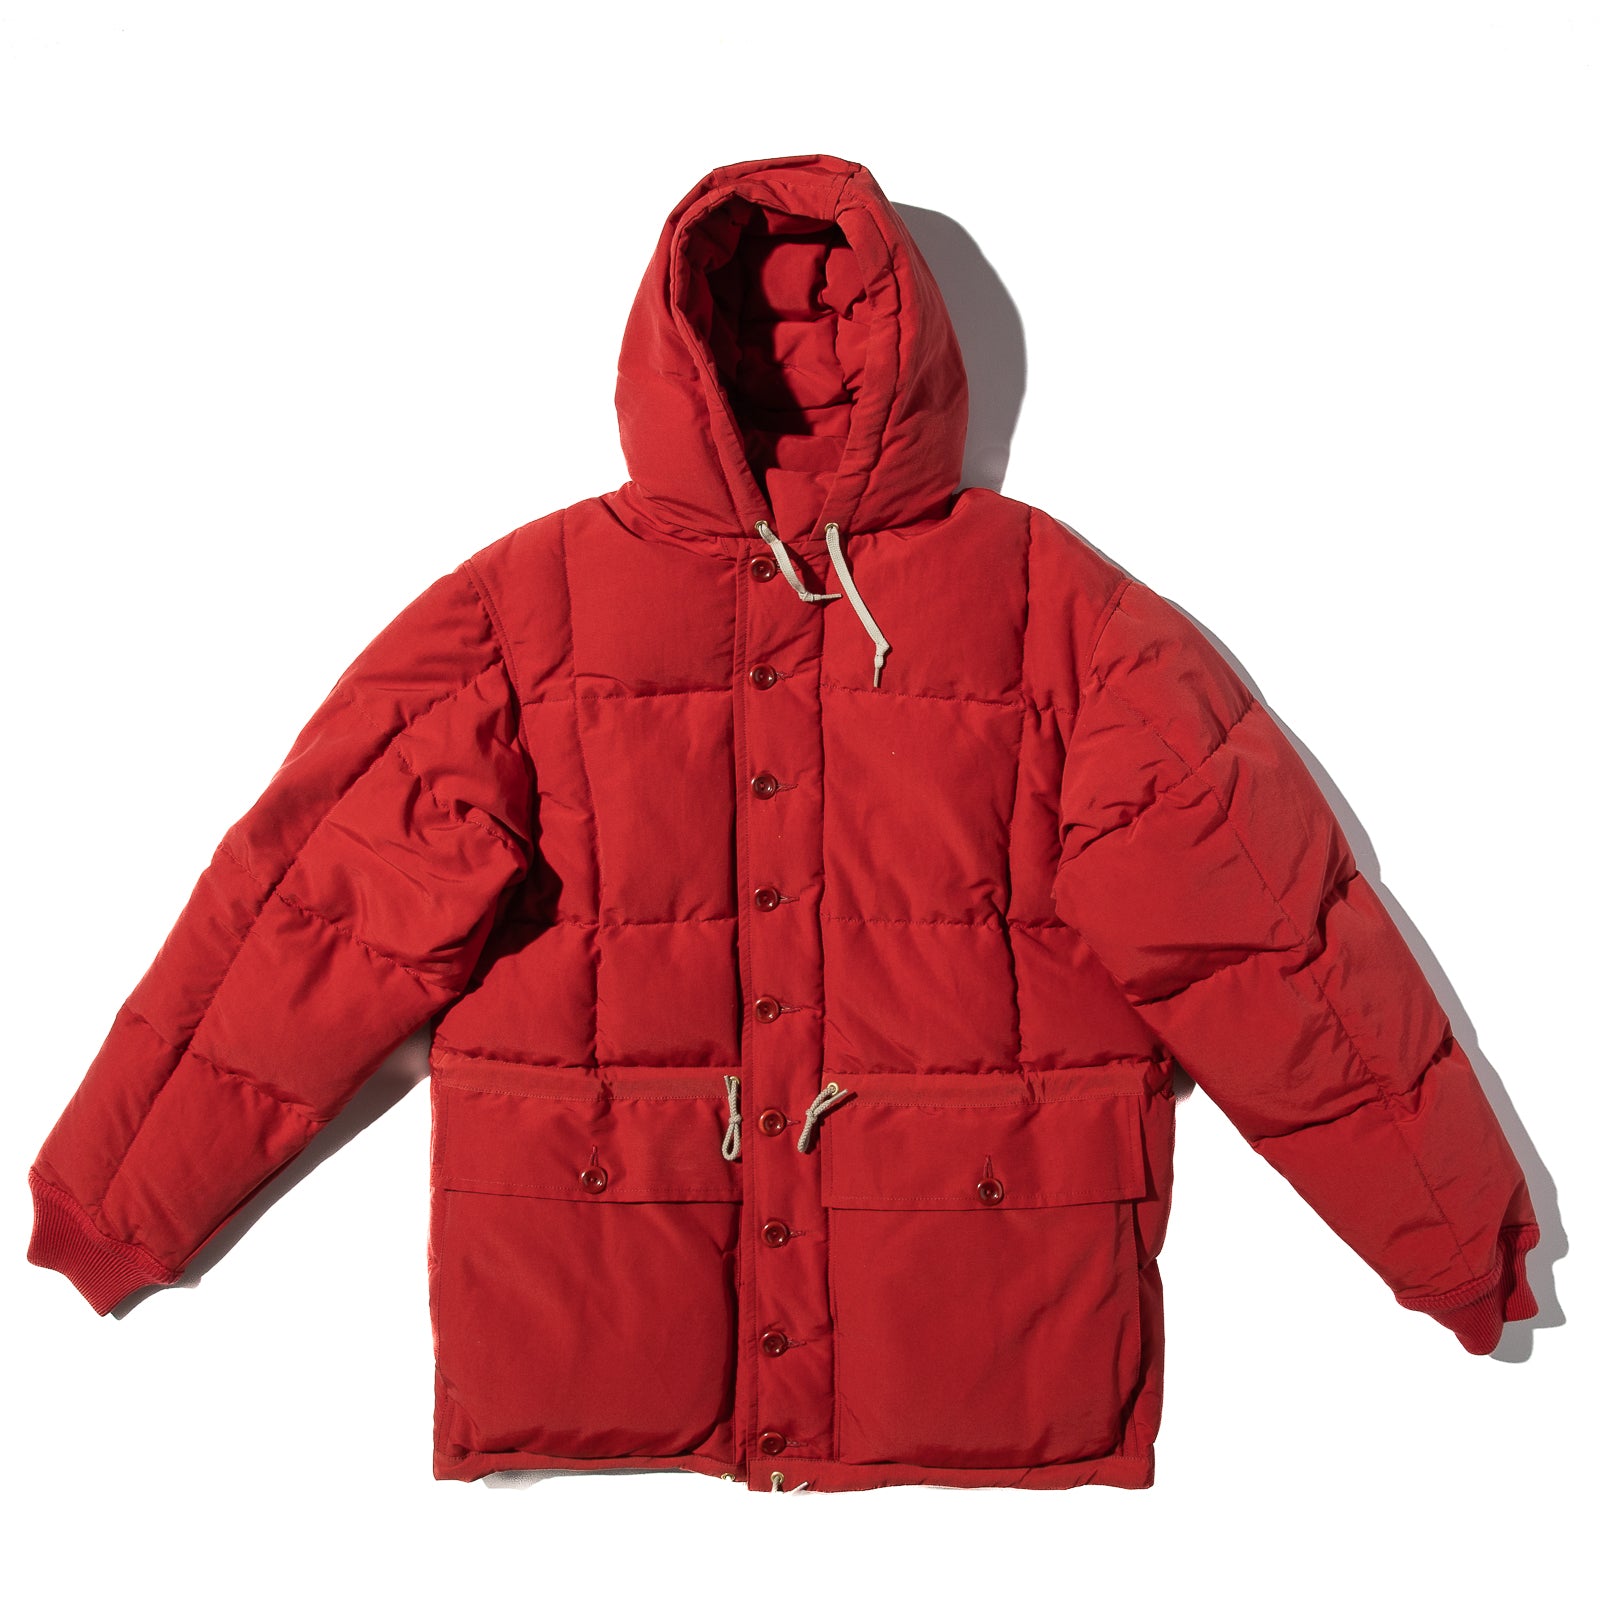 The Real McCoy's Hooded Down Jacket